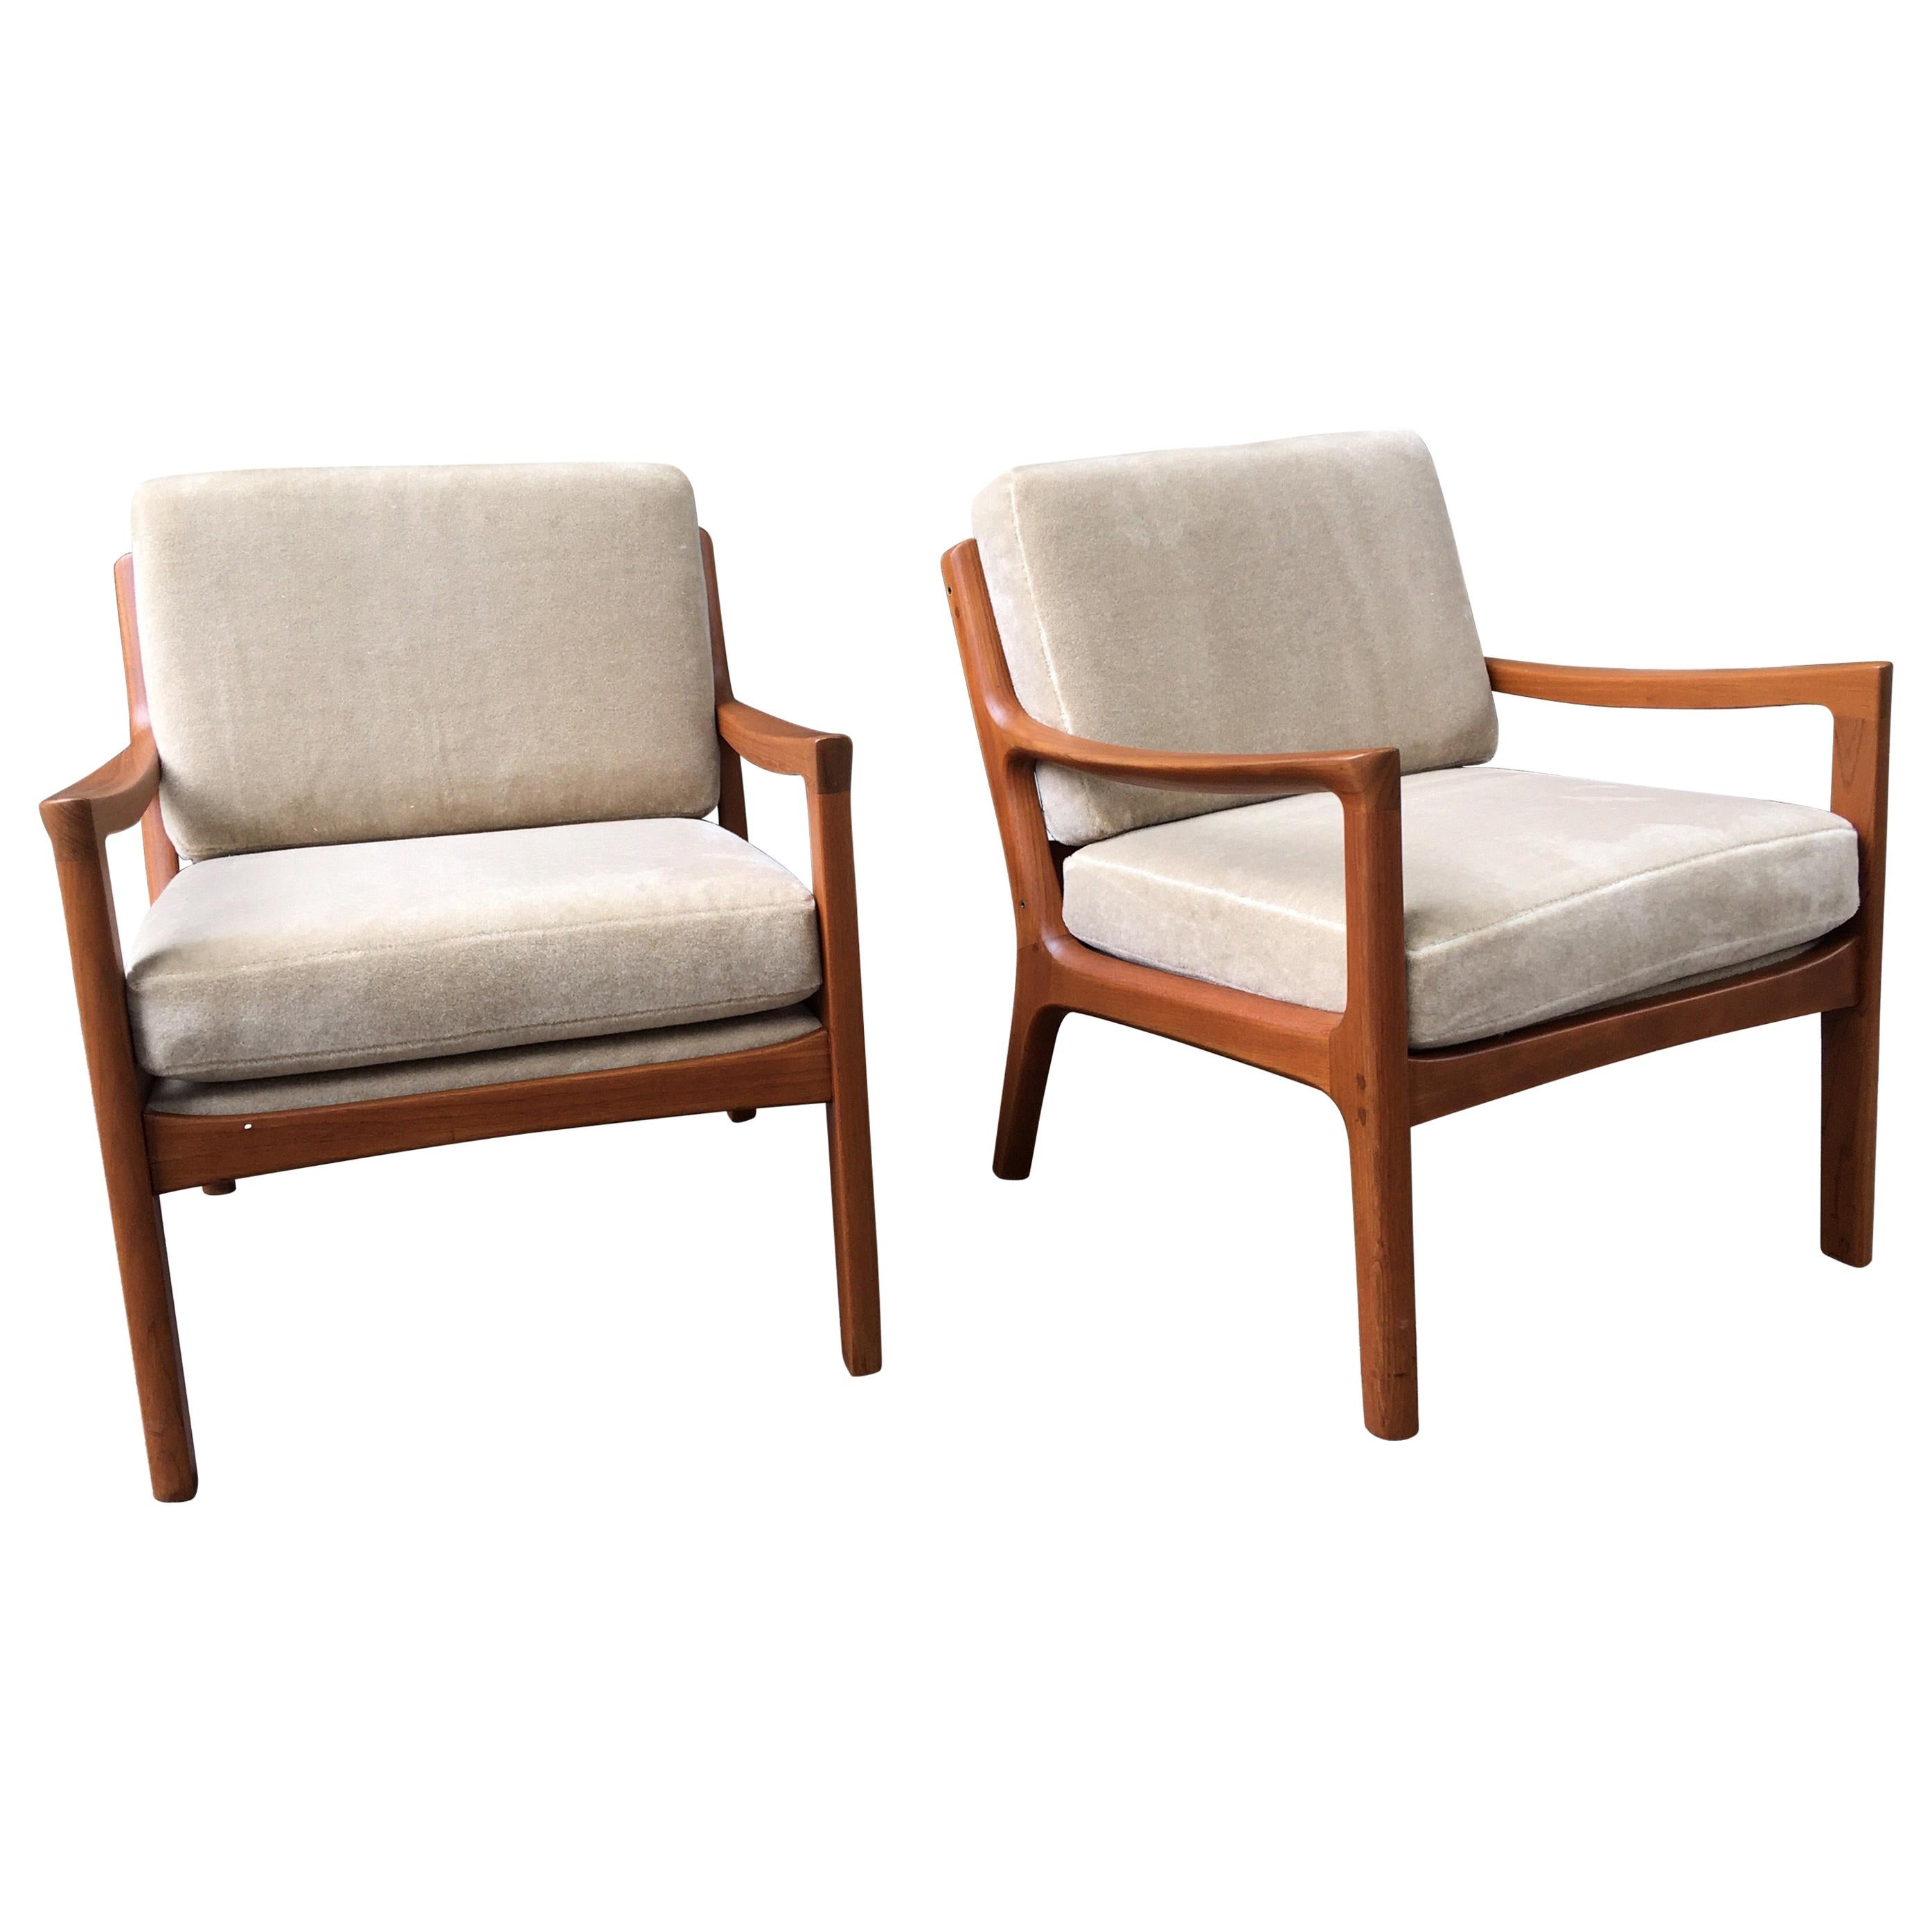 Ole Wanscher Pair of Senator Chairs in Teak and Mohair